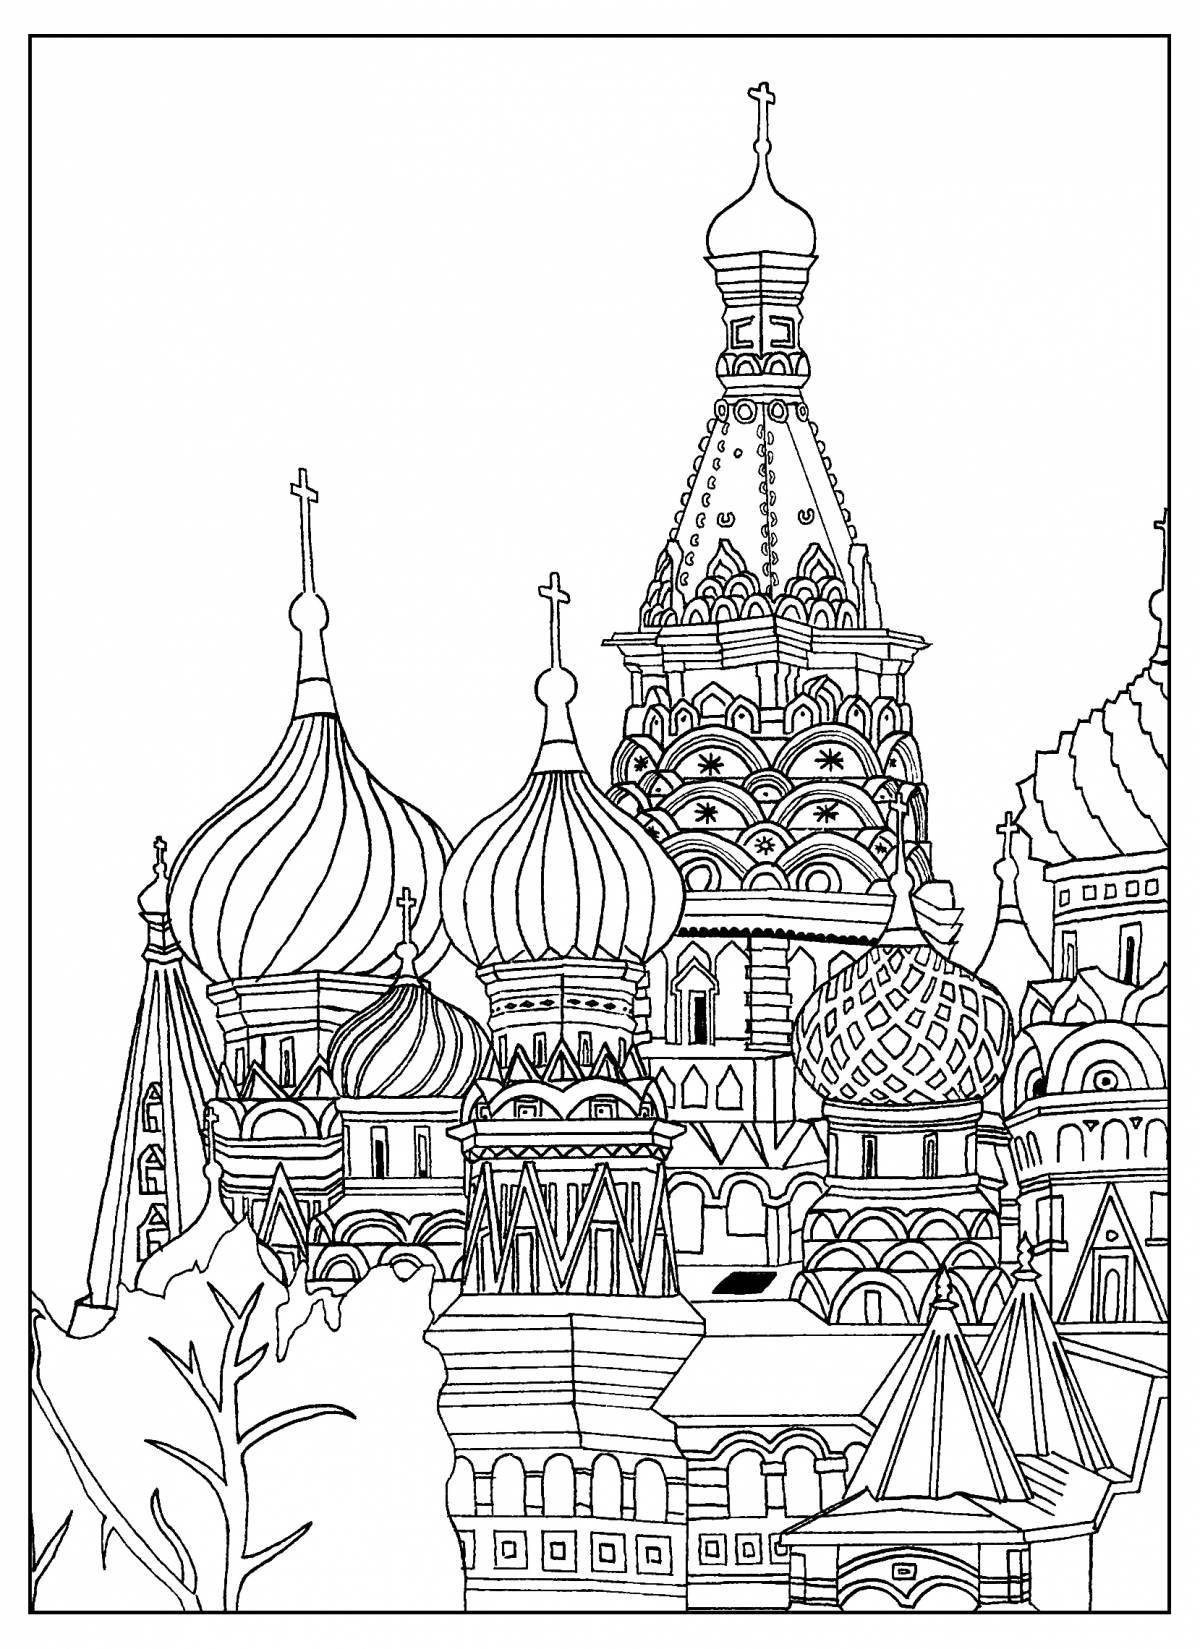 Bright moscow coloring for grade 1